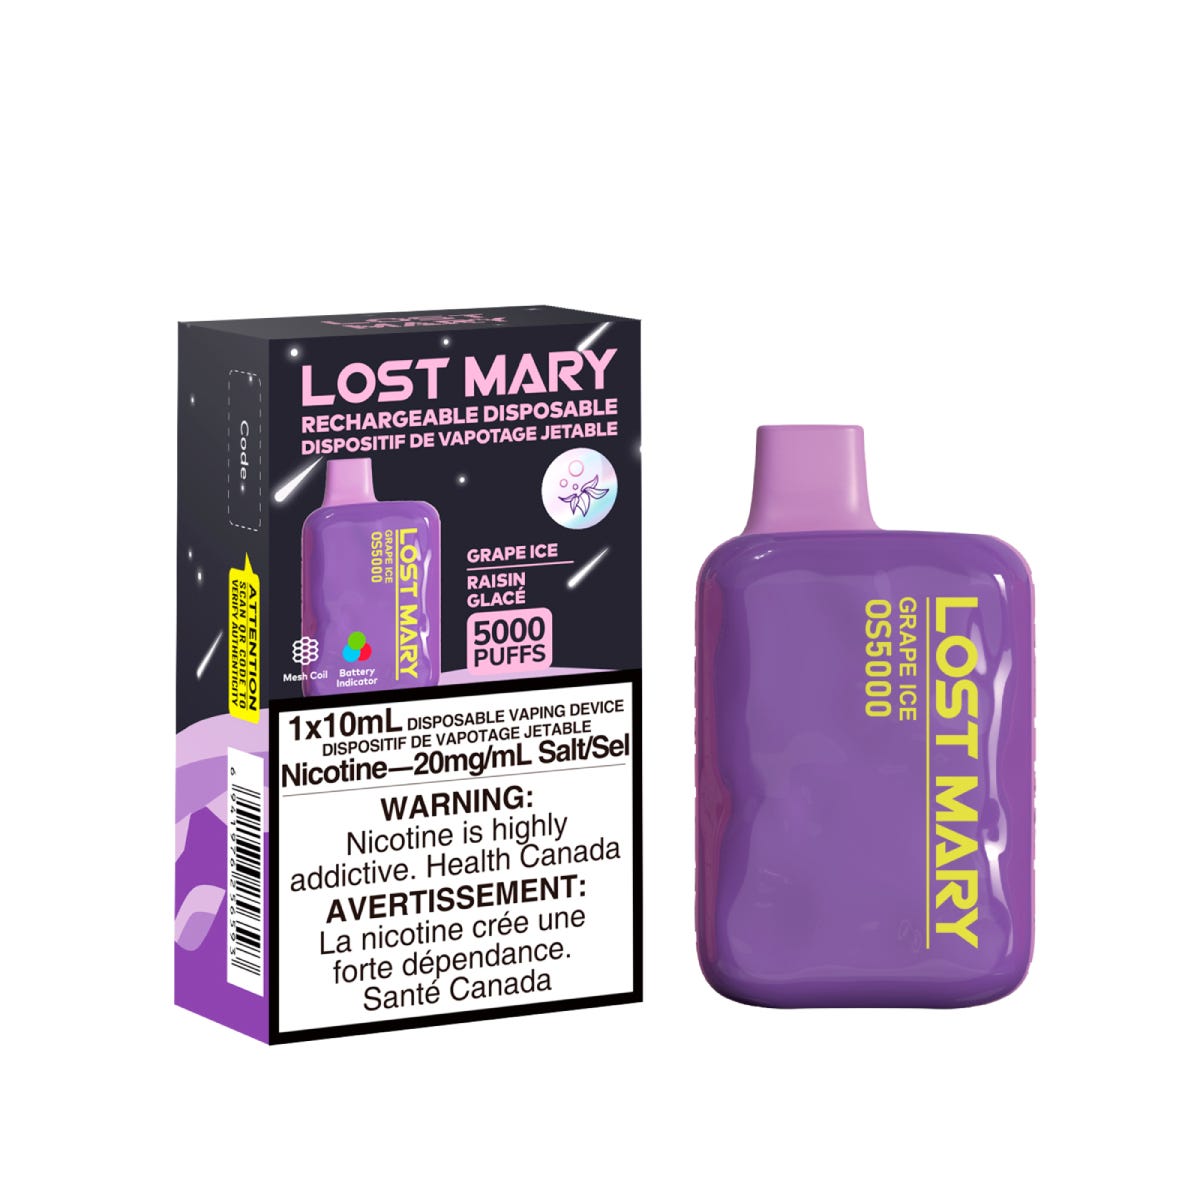 LostMary OS5000 - Rechargeable Disposable - 5000 puffs